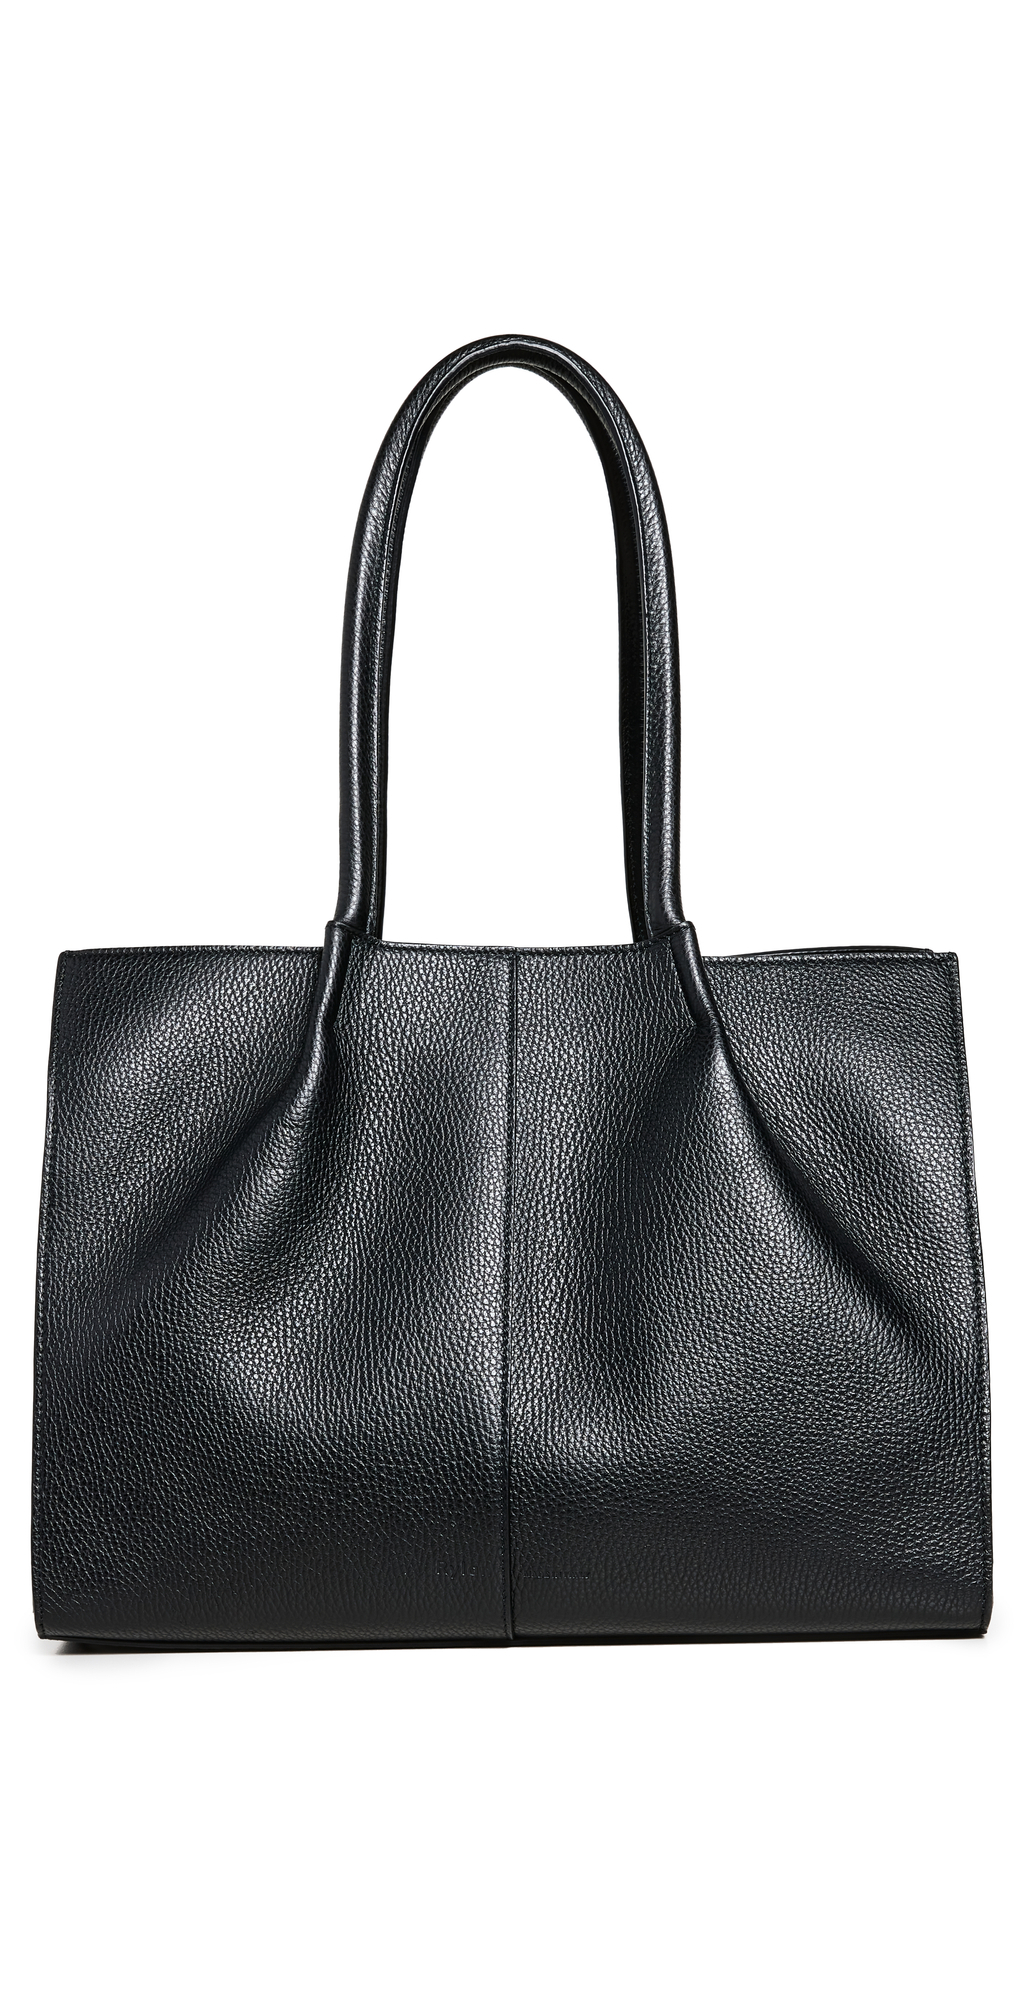 Rylan Soft Grained Large Tote in black